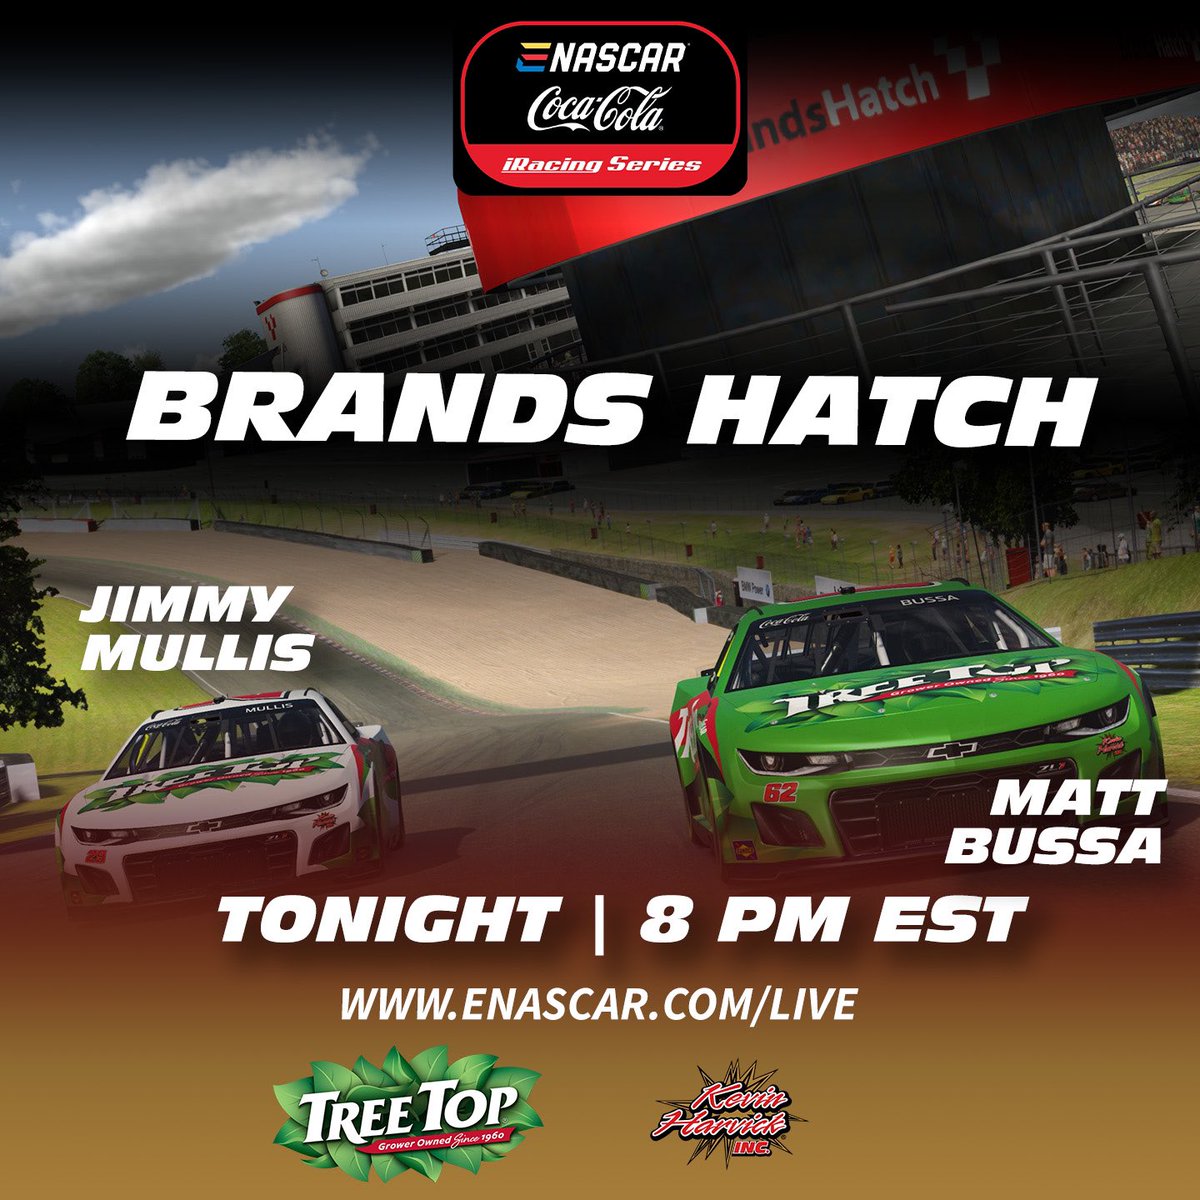 It’s race day at @Brands_Hatch for the first road course of the @iRacing @ENASCARGG season! @MattBussa and @jmullisracing are ready to take on the 9-turn course. #TeamKHI | @KHI_Racing | @KHIManagement | @TreeTopInc ⏰: Race @ 8 p.m. ET. 💻: enascar.com/live